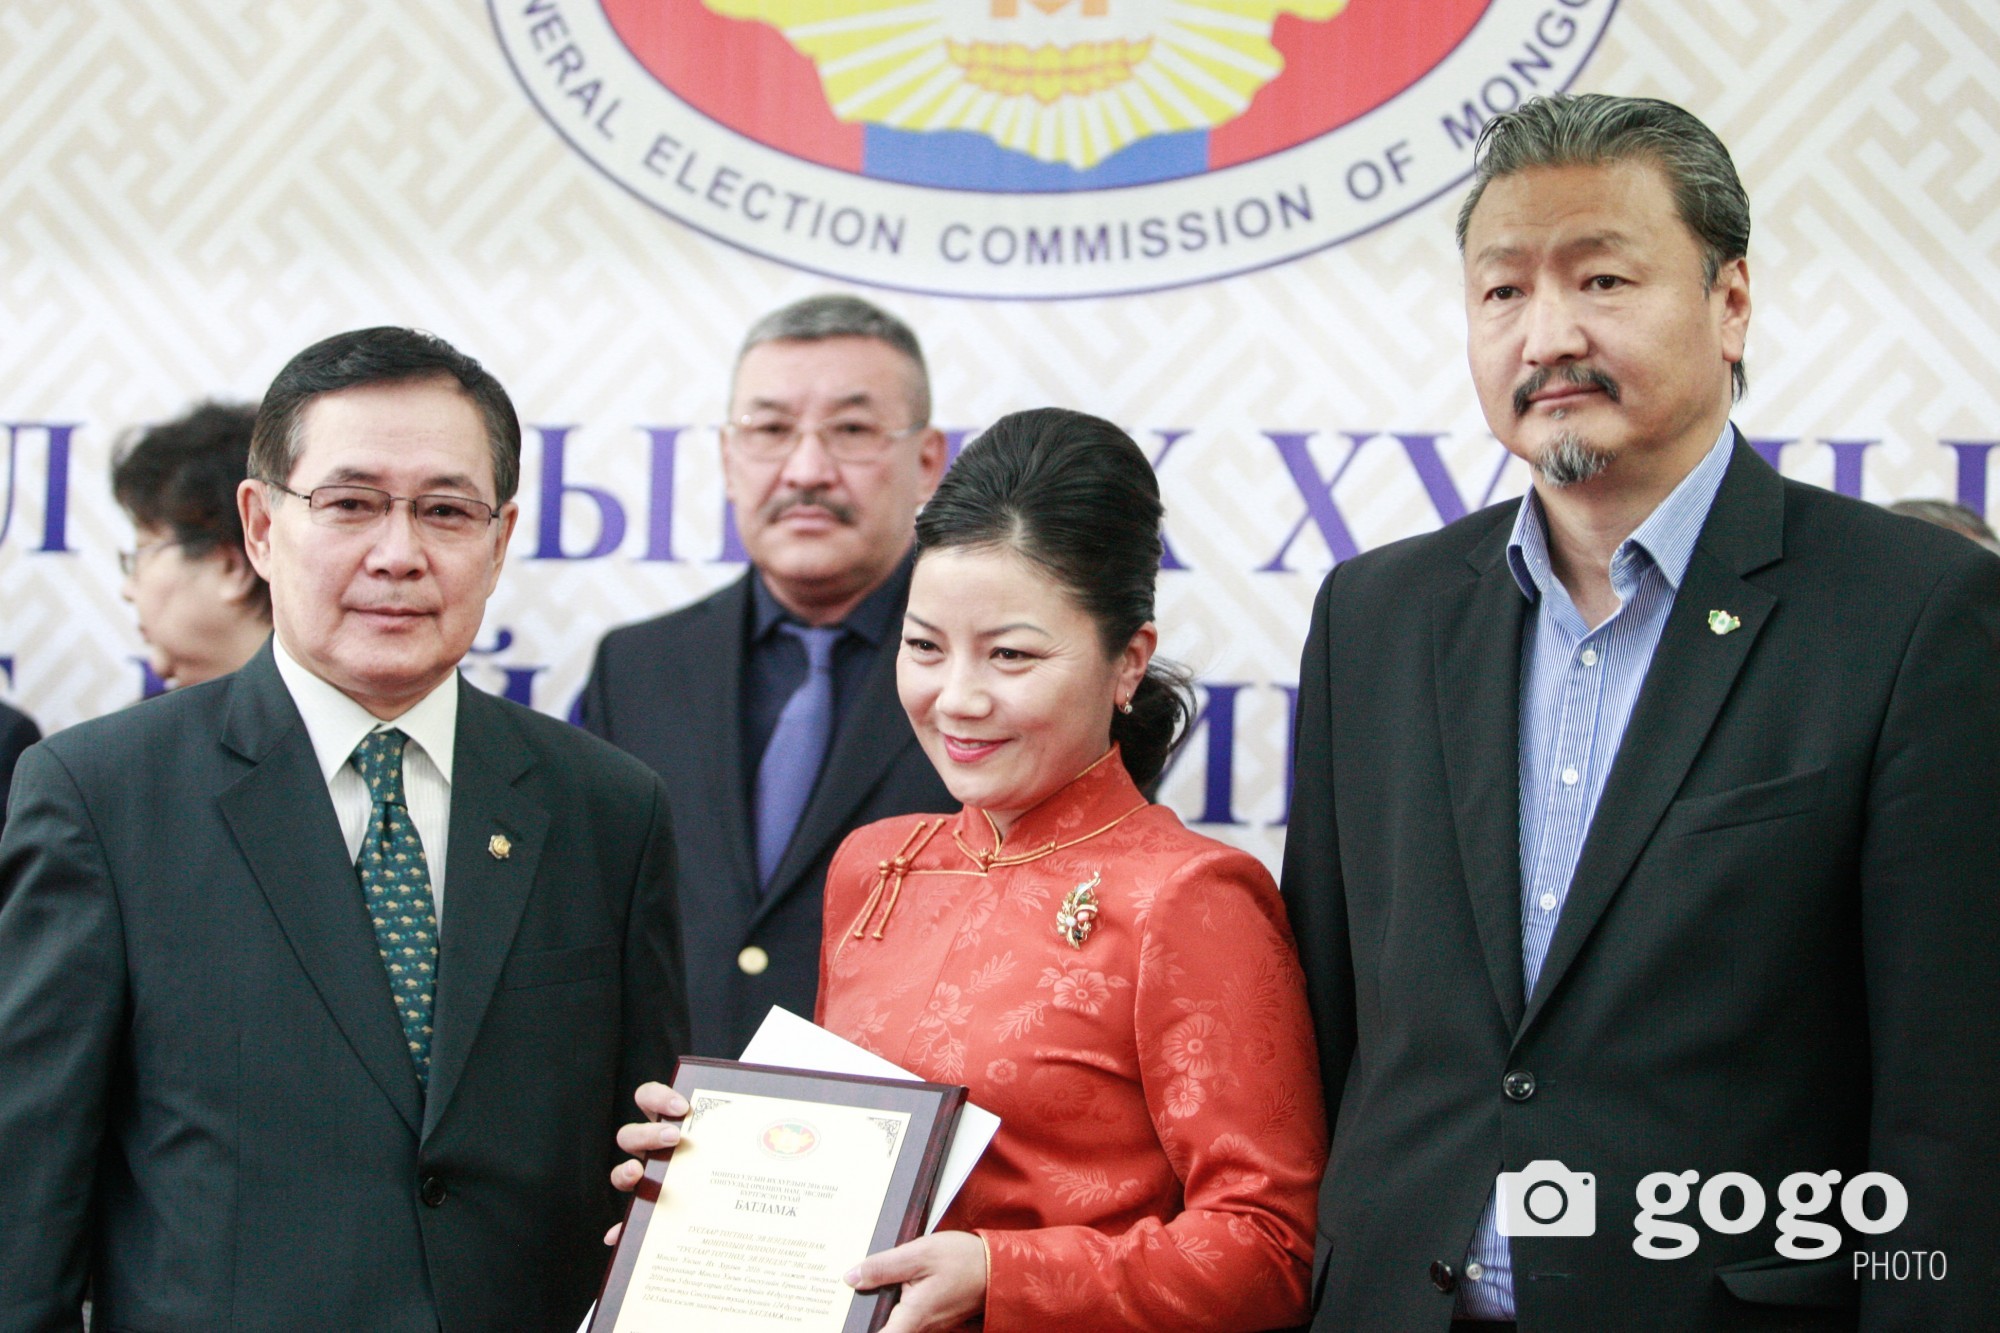 Unity coalition of the Independence and Unity Party /IUP/ and Mongolian Green Party /MGP/